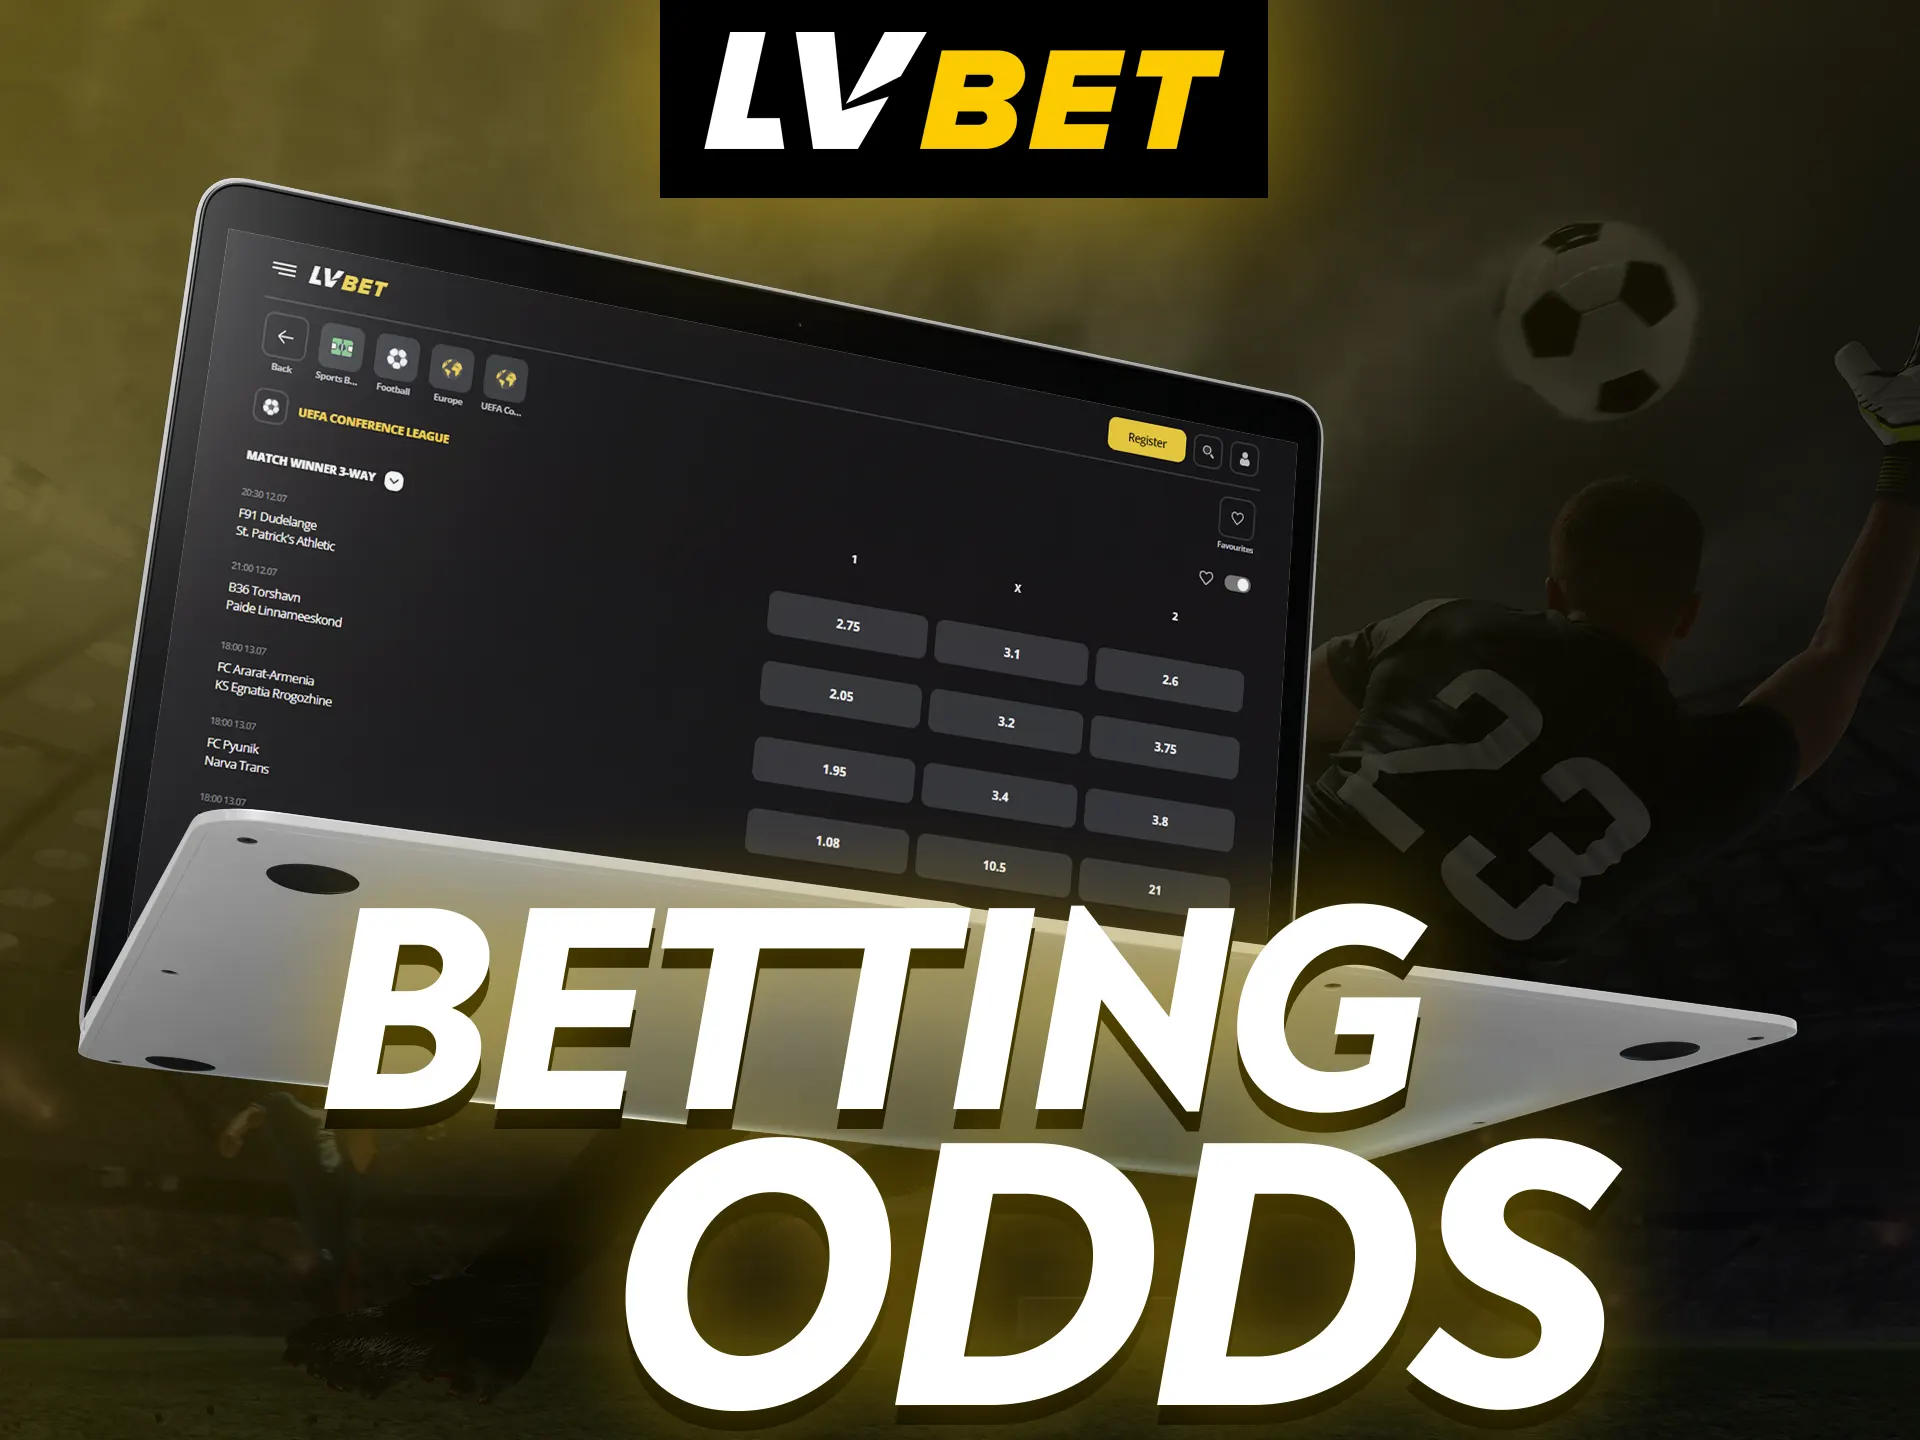 With LV Bet you have the best betting odds available.